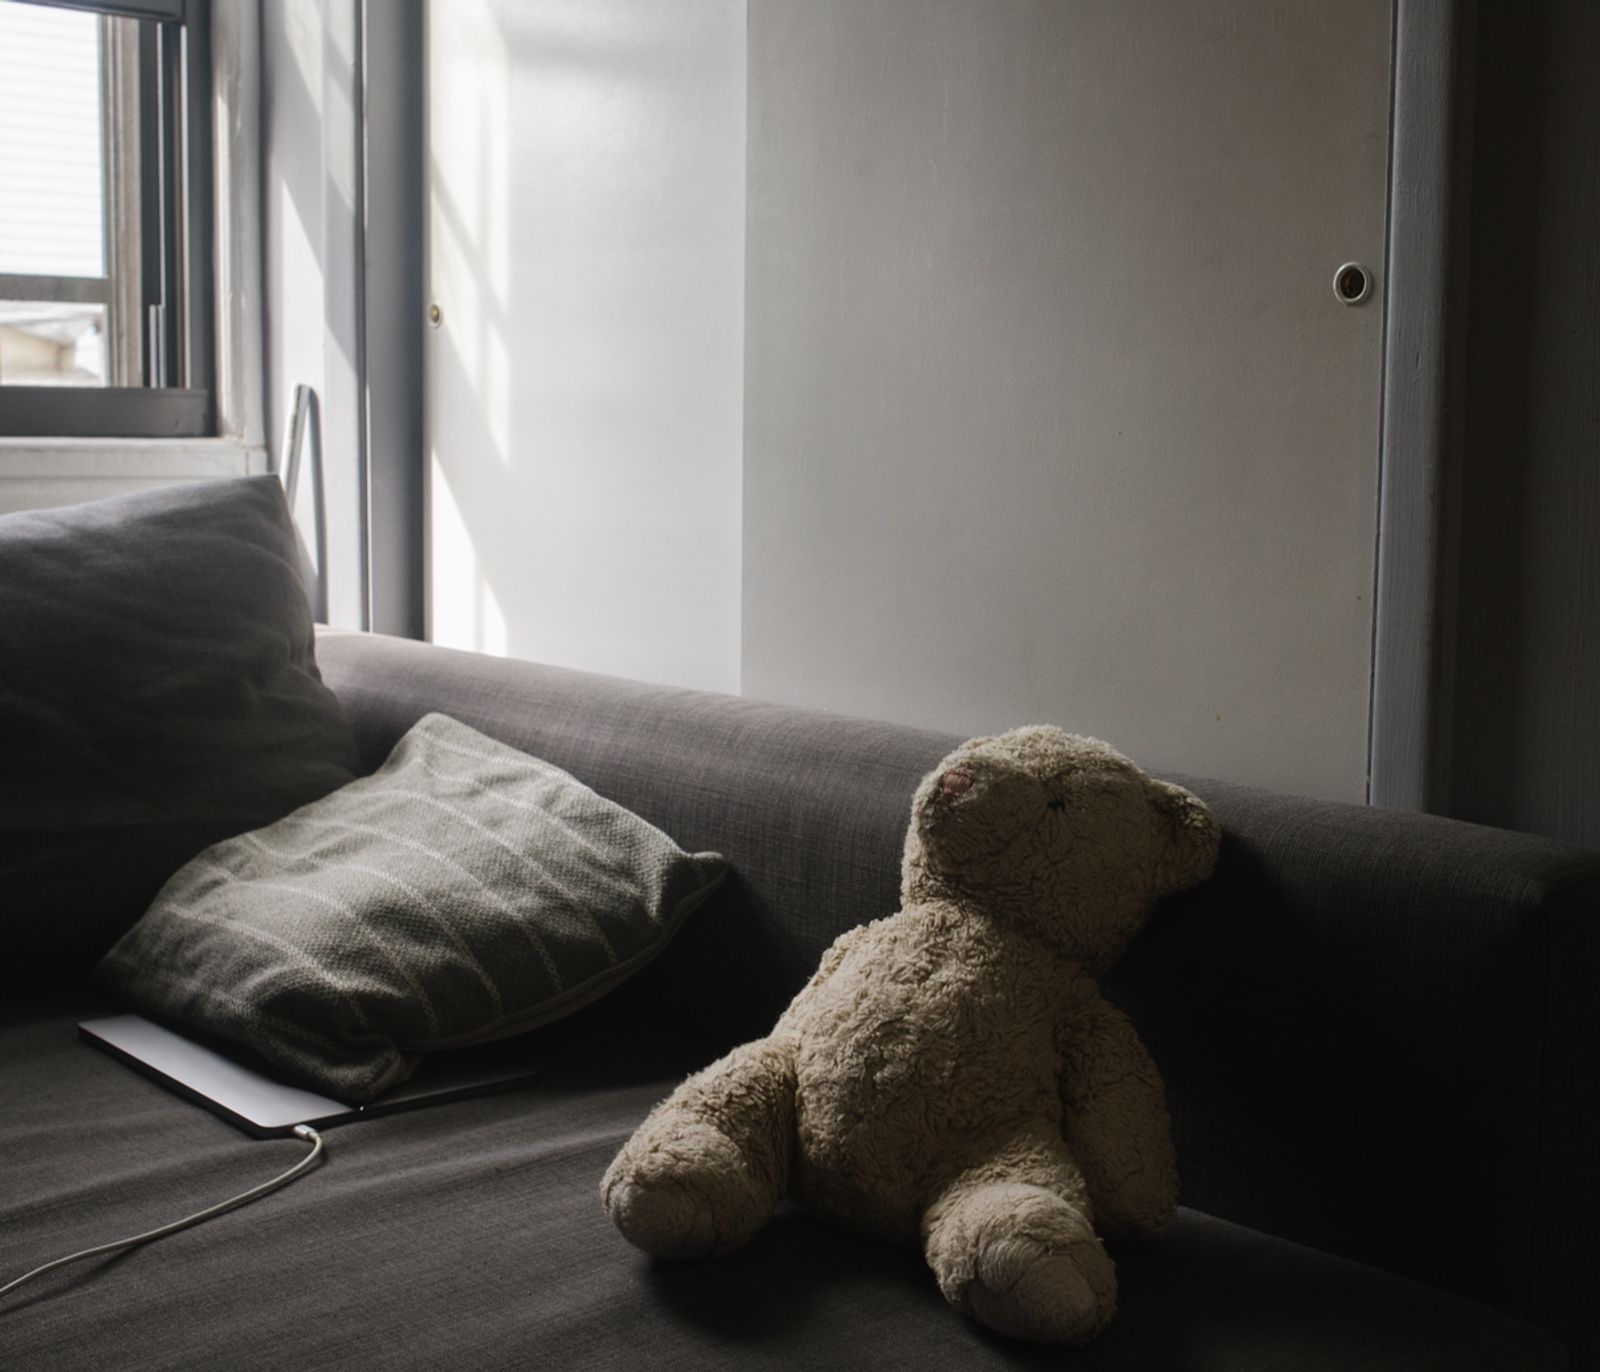 © Gili Benita - A teddy bear and a laptop left alone on the couch while Eyal and Sam went groccerie shopping. Ridgewood, NYC, May 18th, 2020